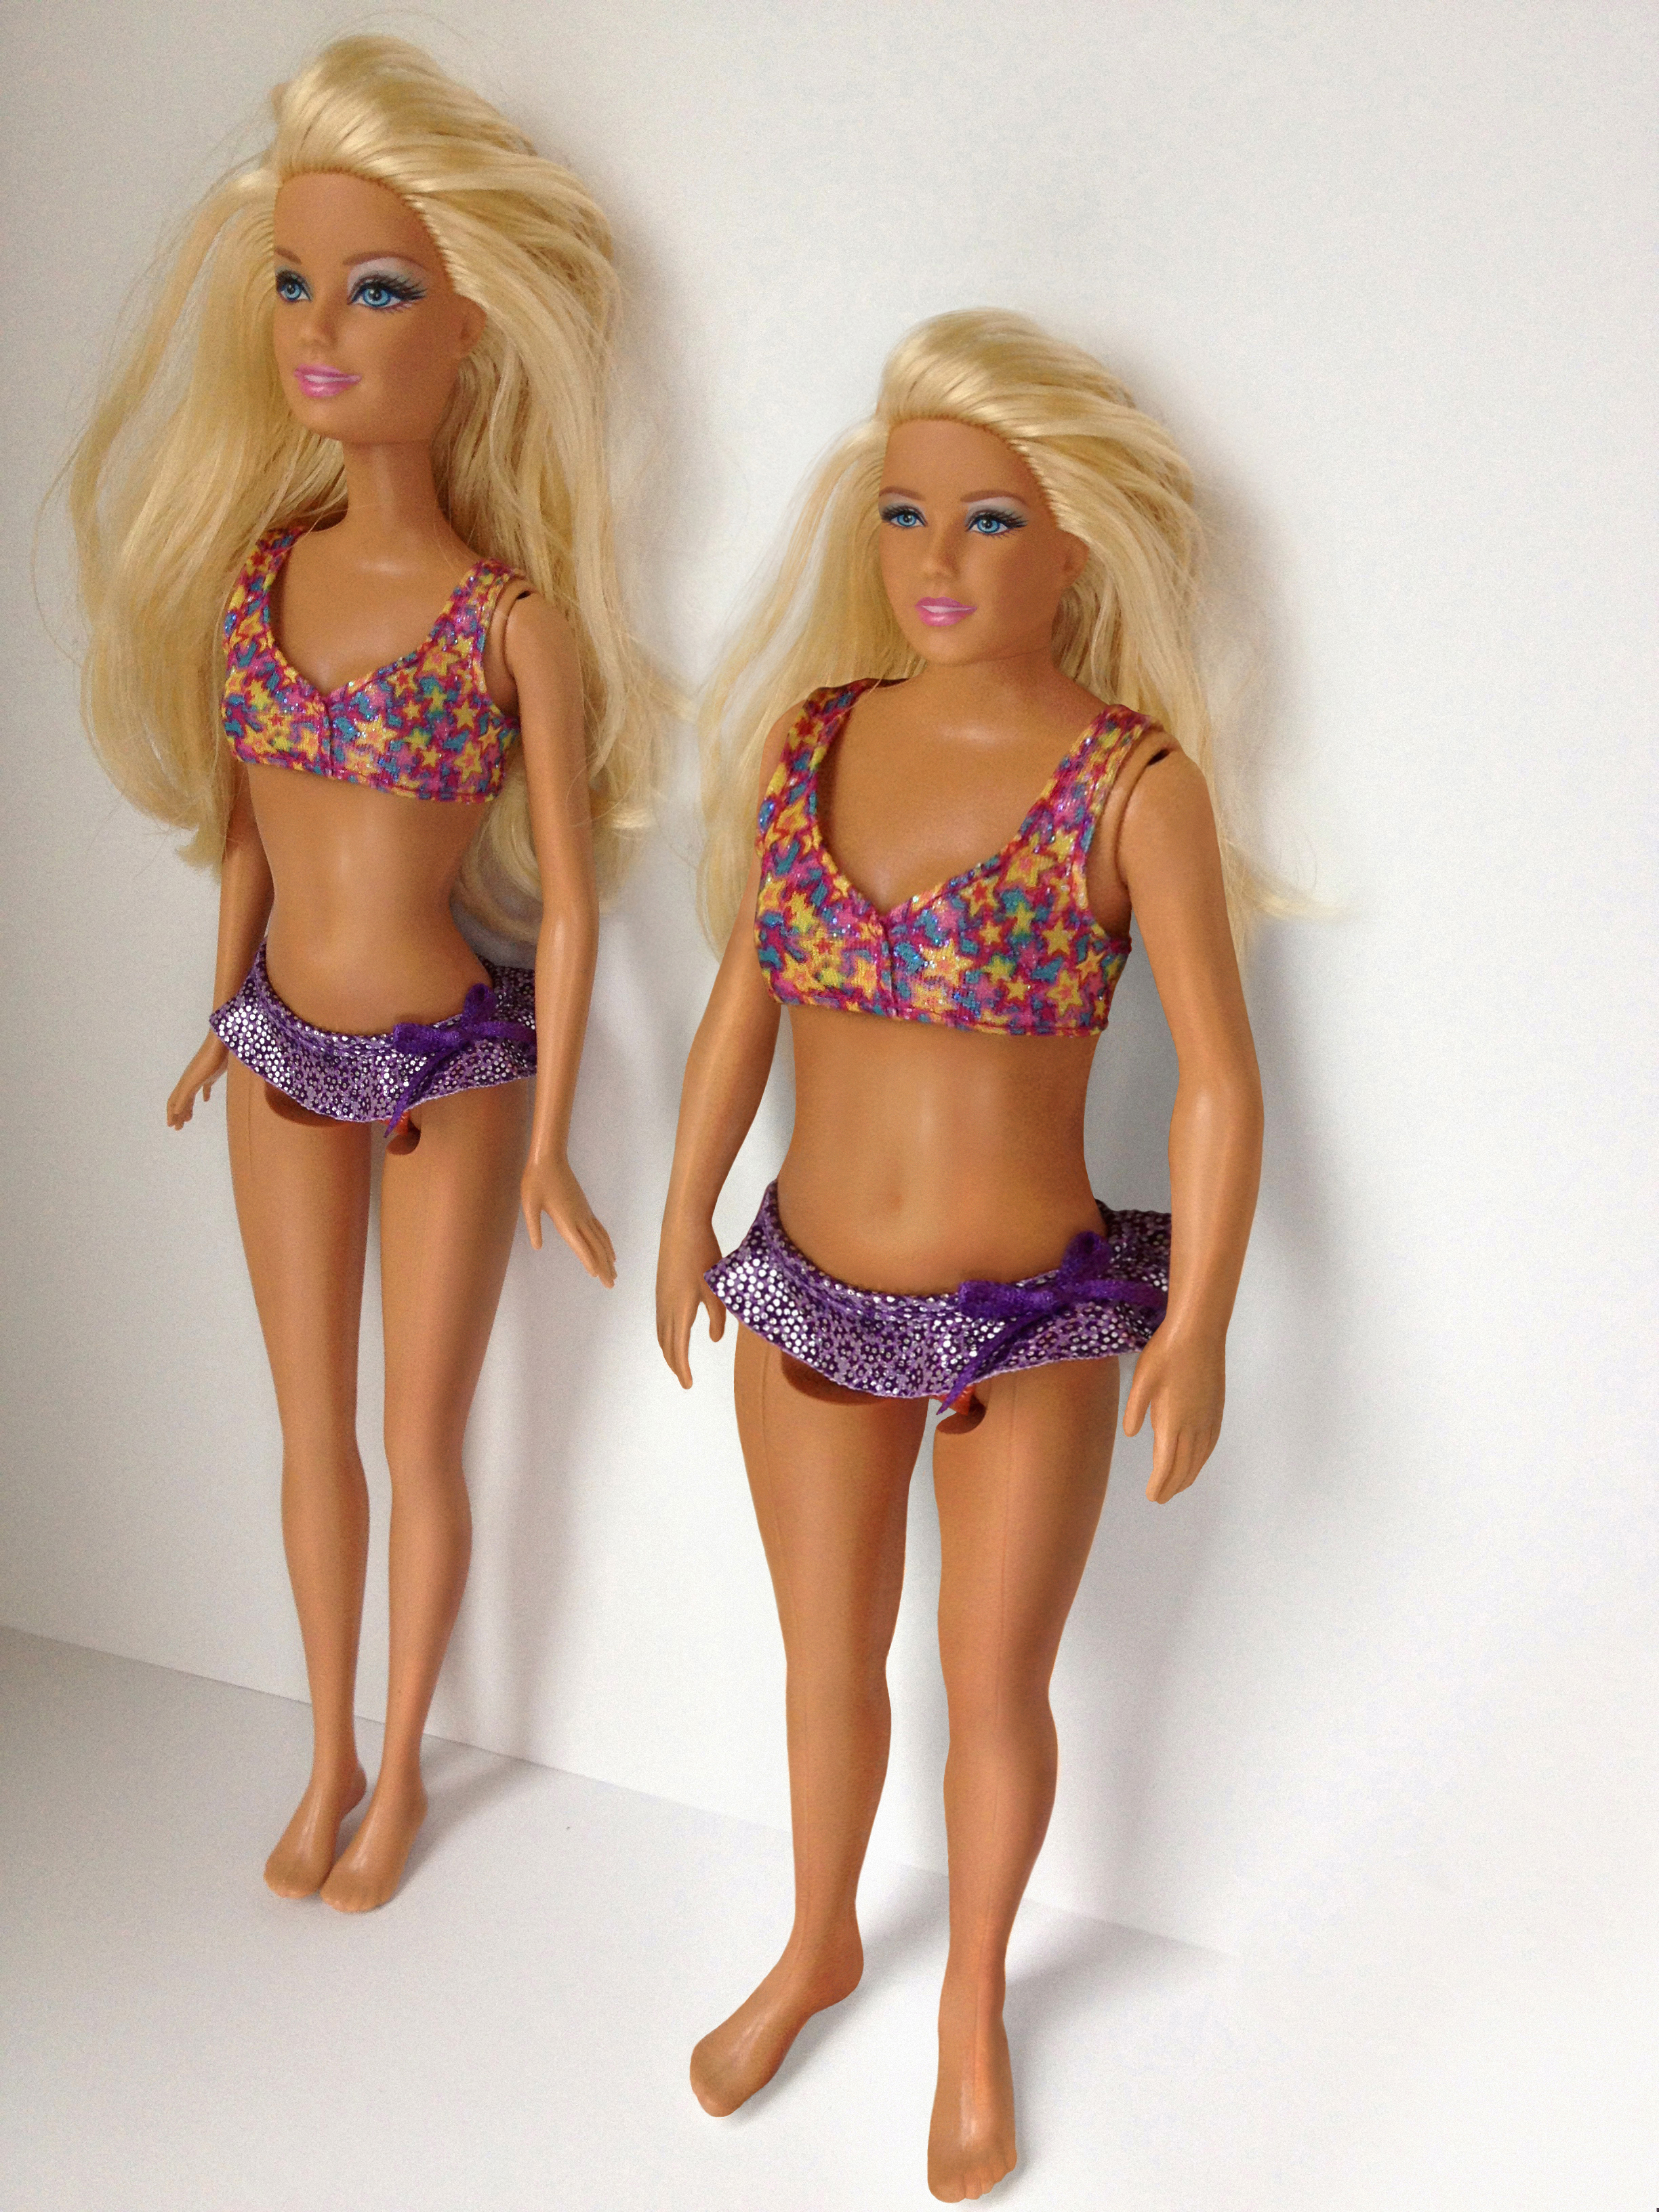 shave and play barbie doll